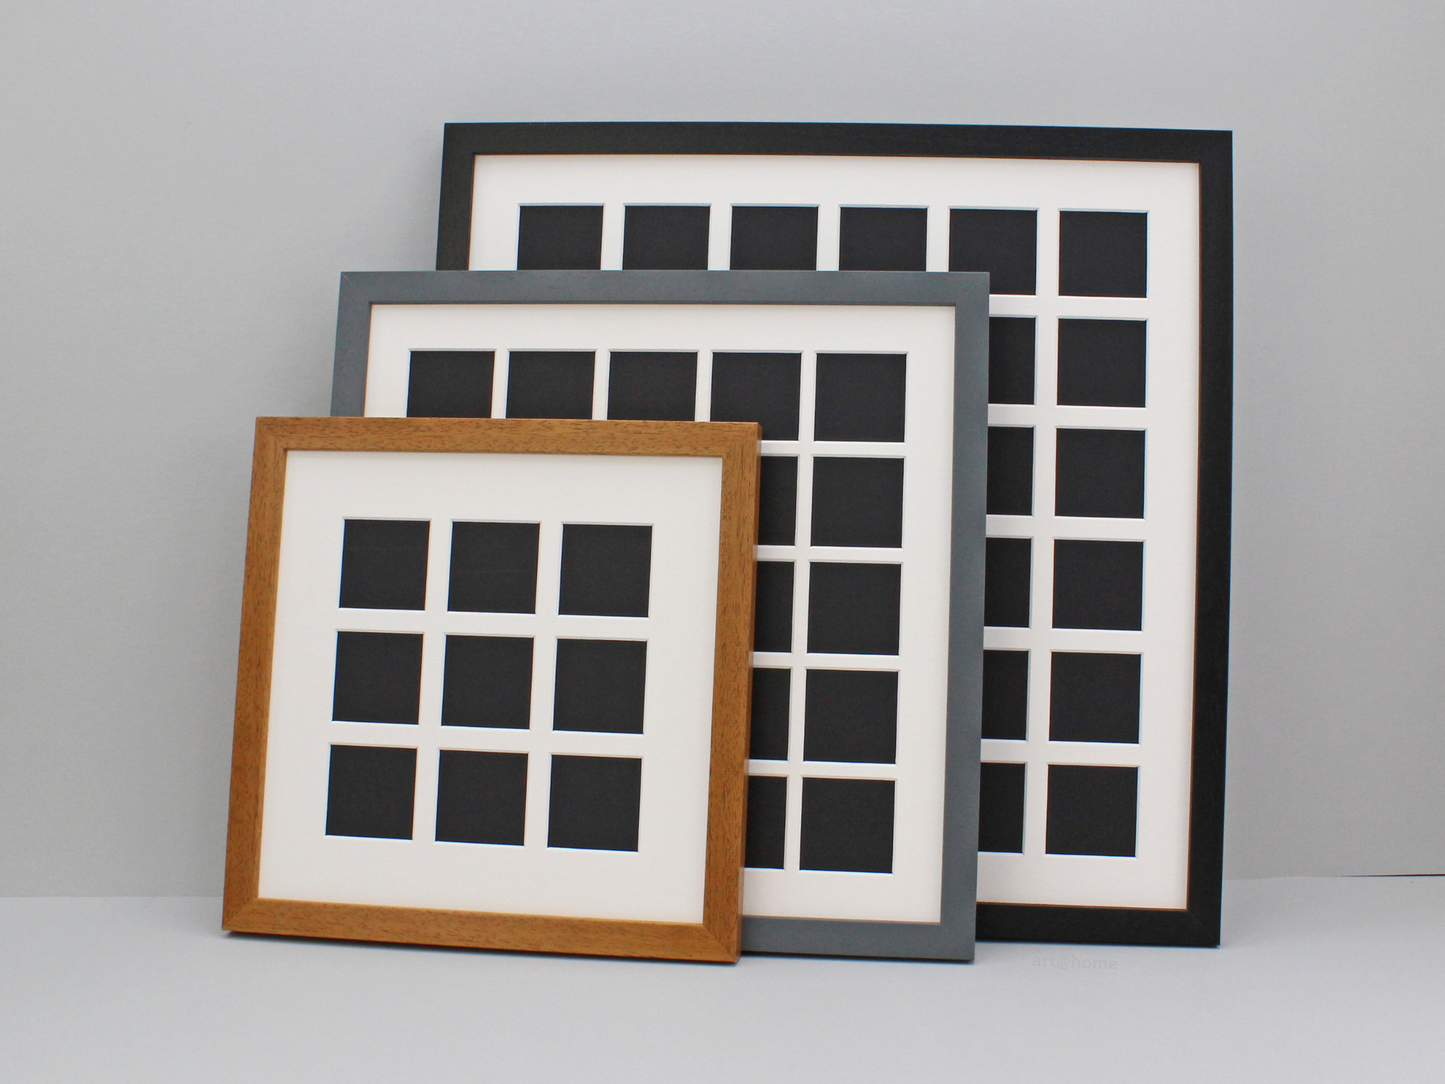 Instax Square Multi Aperture Wooden Photo Frame. Holds Forty-Nine 62mmx62mm sized Photos. 60x60cm - PhotoFramesandMore - Wooden Picture Frames